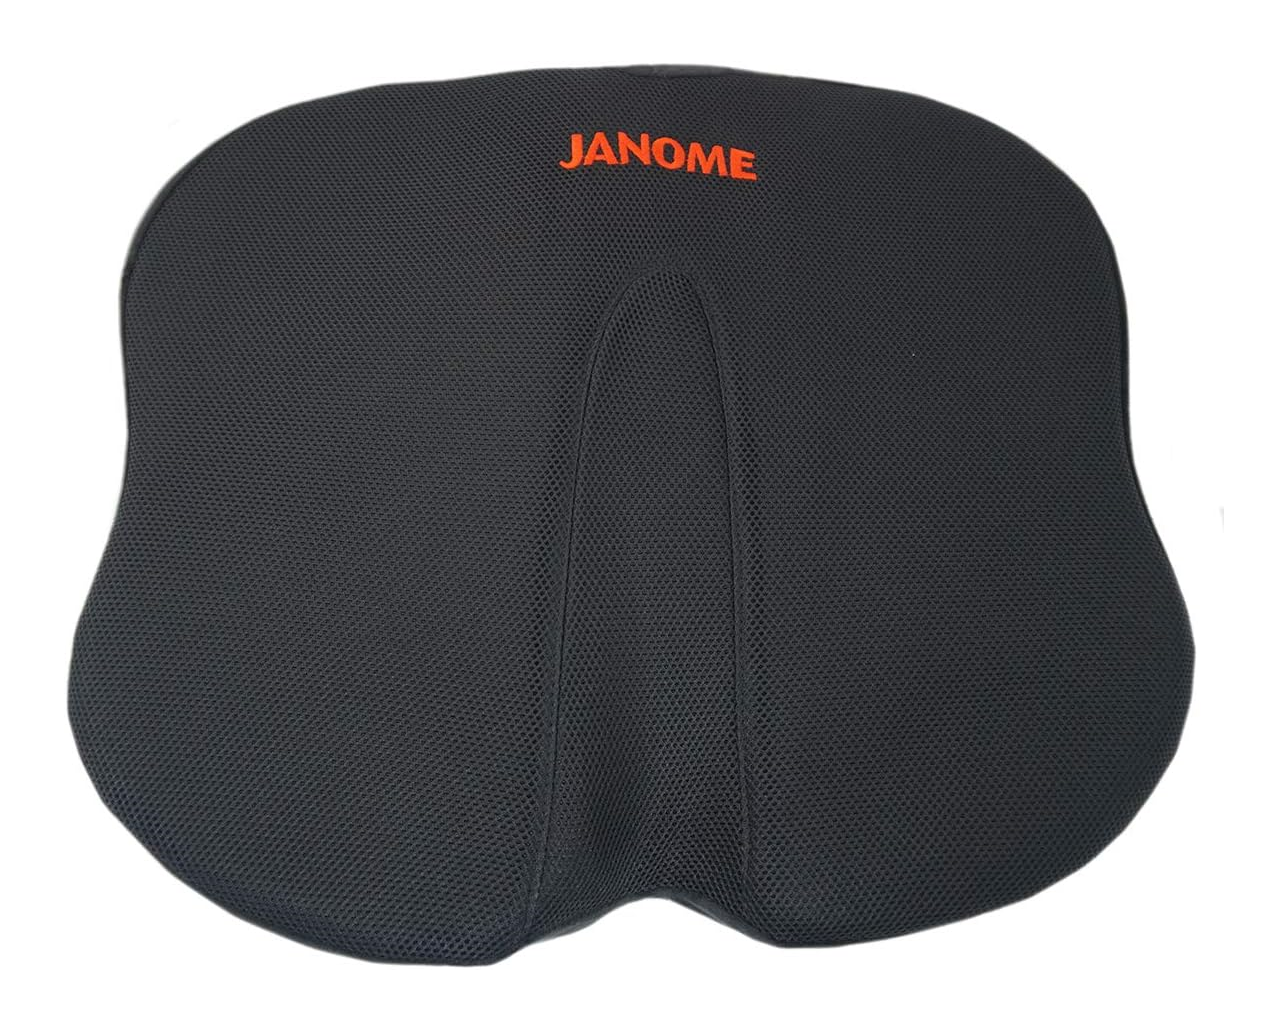 Janome Sew Comfortable Memory Foam Seat Cushion JASEATCUSHION for Sale at World Weidner